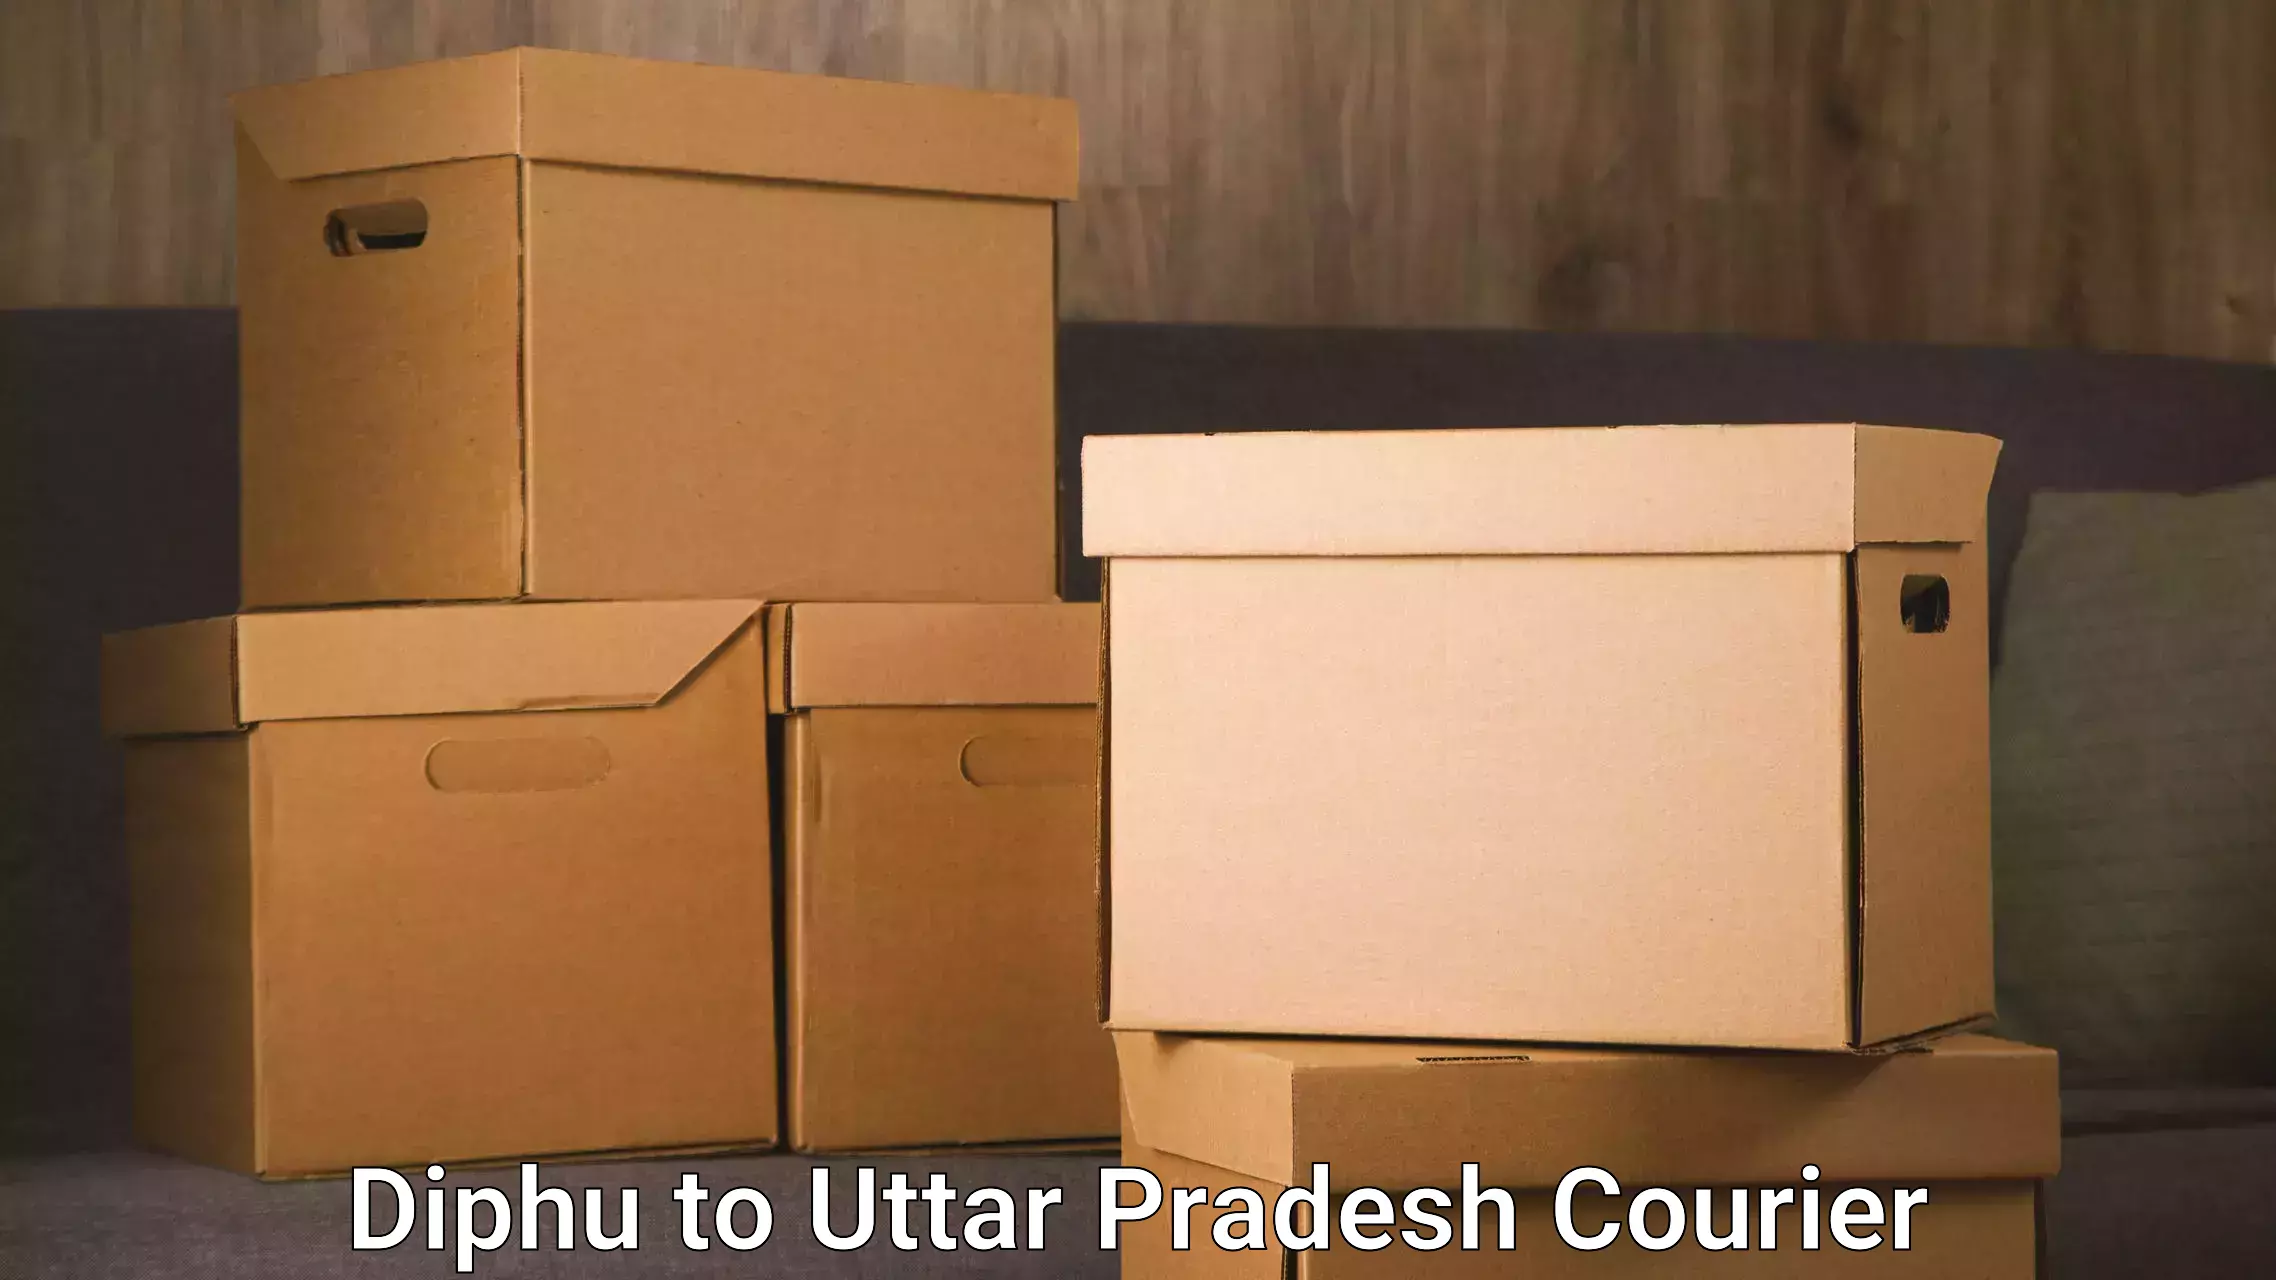 Reliable parcel services Diphu to Farrukhabad